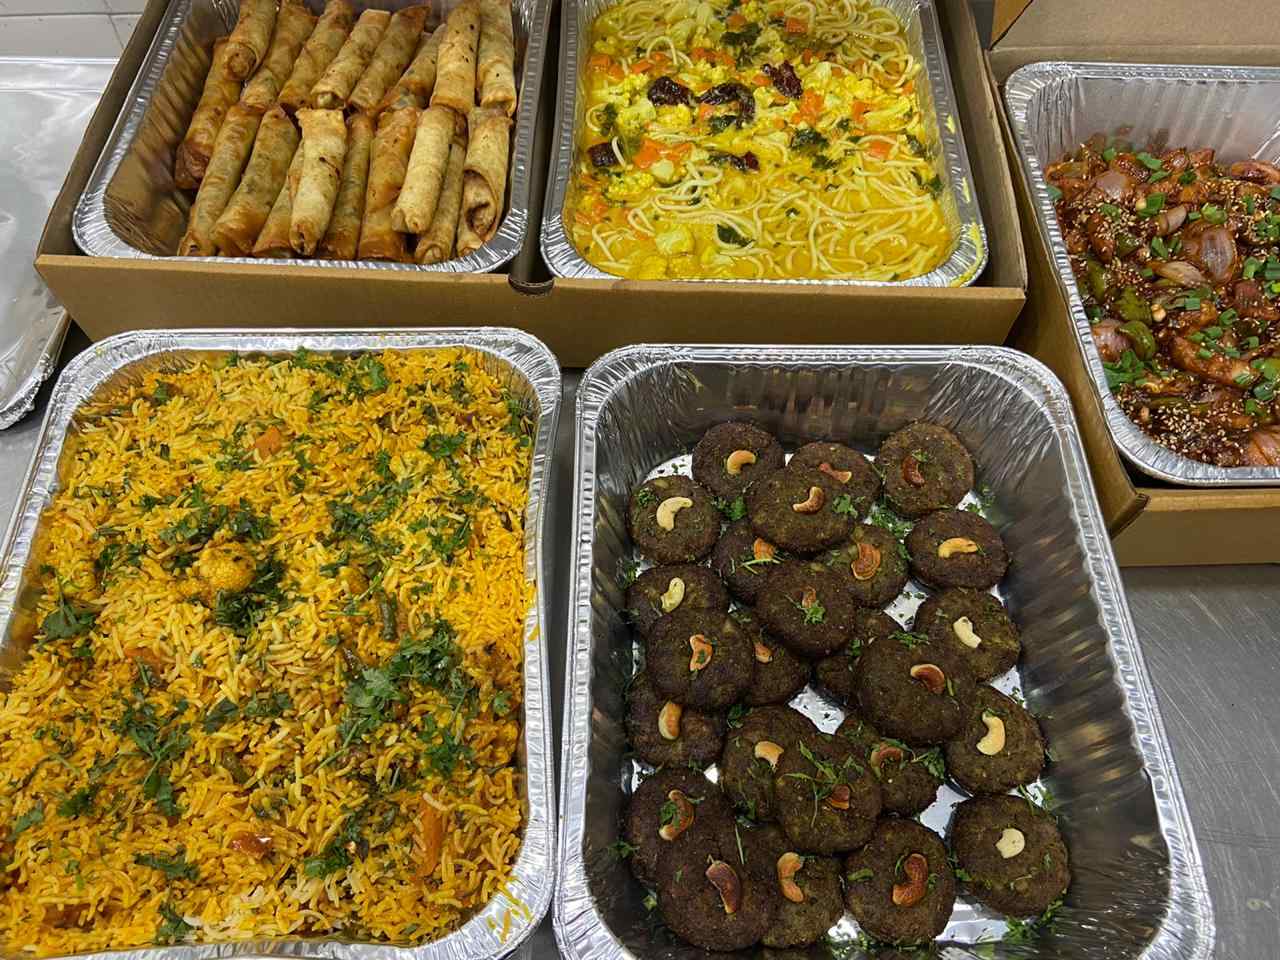 Hire Catering Service Online For Snacks Box For Office Party